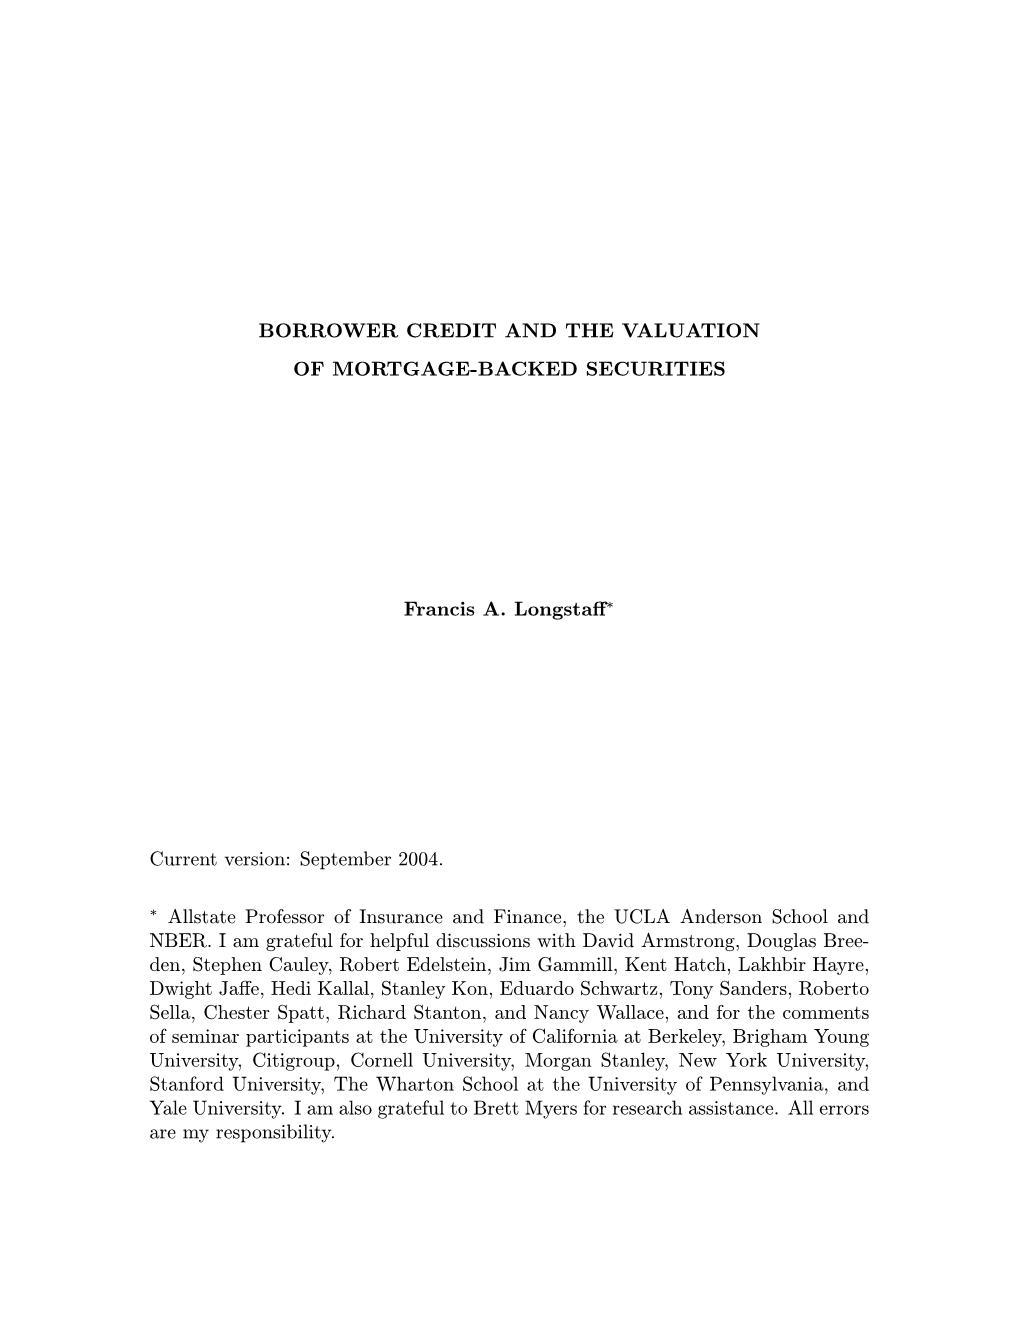 Borrower Credit and the Valuation of Mortgage-Backed Securities